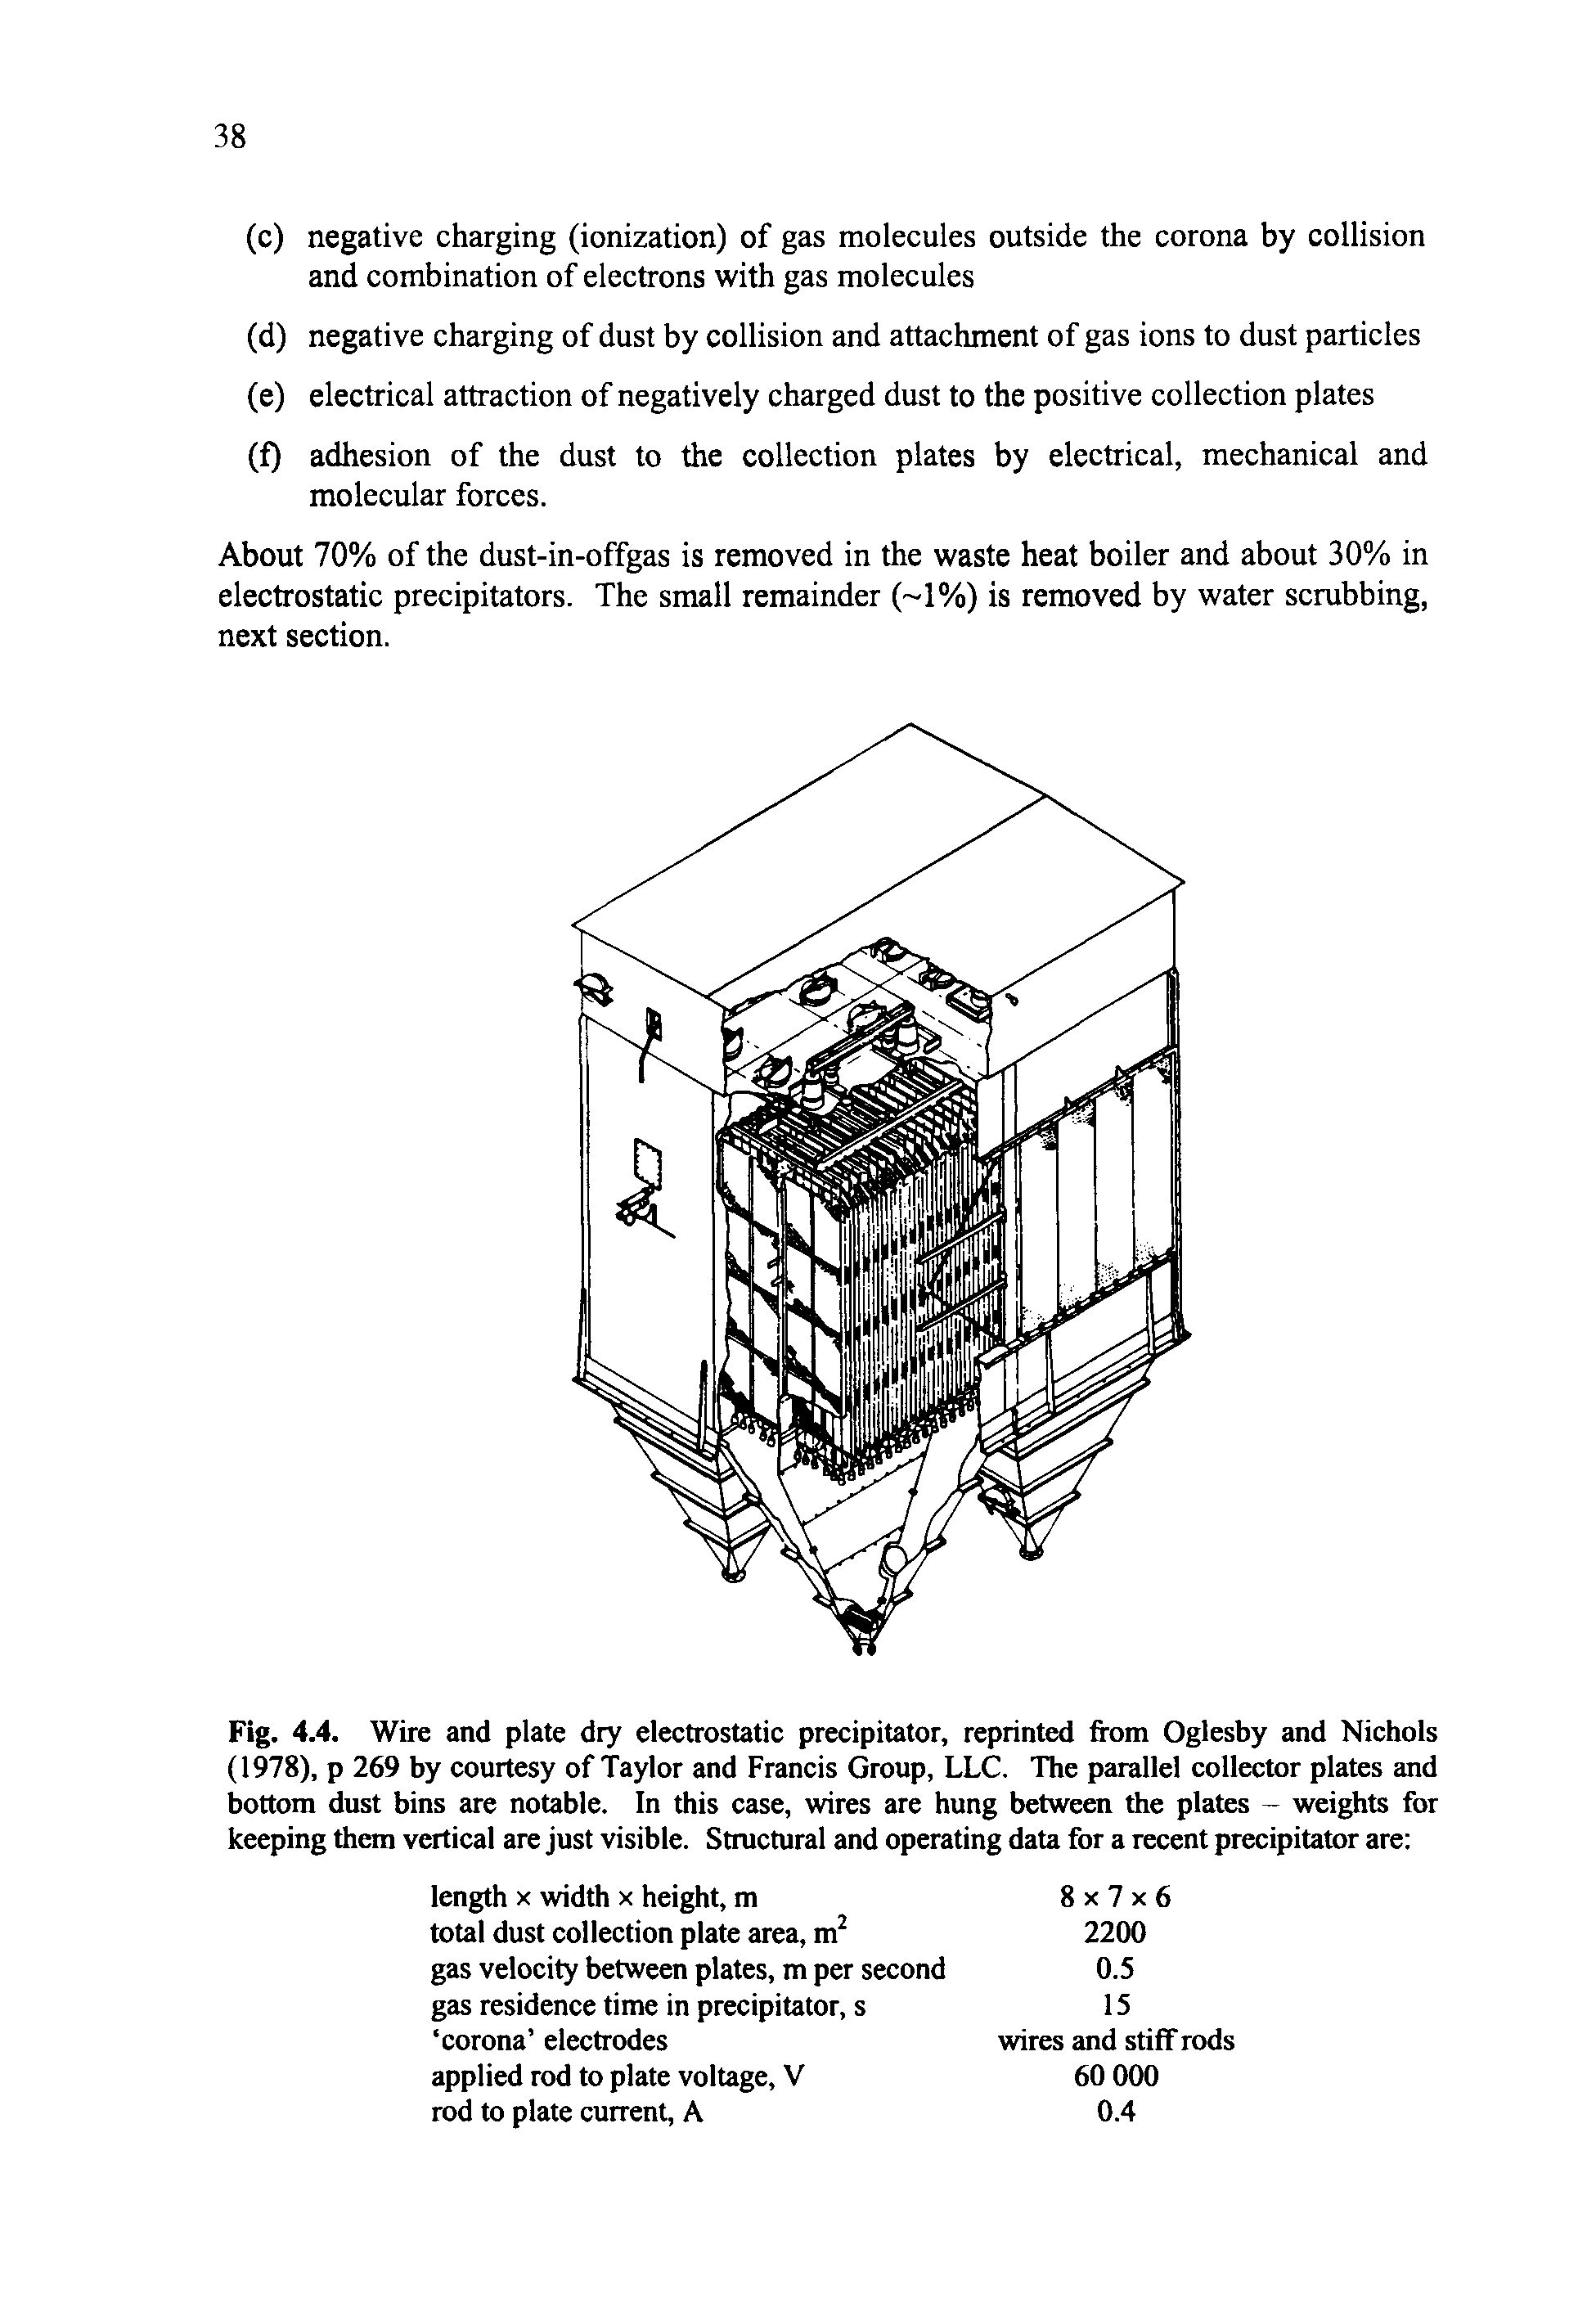 Fig. 4.4. Wire and plate dry electrostatic precipitator, reprinted from Oglesby and Nichols (1978), p 269 by courtesy of Taylor and Francis Group, LLC. The parallel collector plates and bottom dust bins are notable. In this case, wires are hung between the plates - weights for keeping them vertical are just visible. Structural and operating data for a recent precipitator are ...